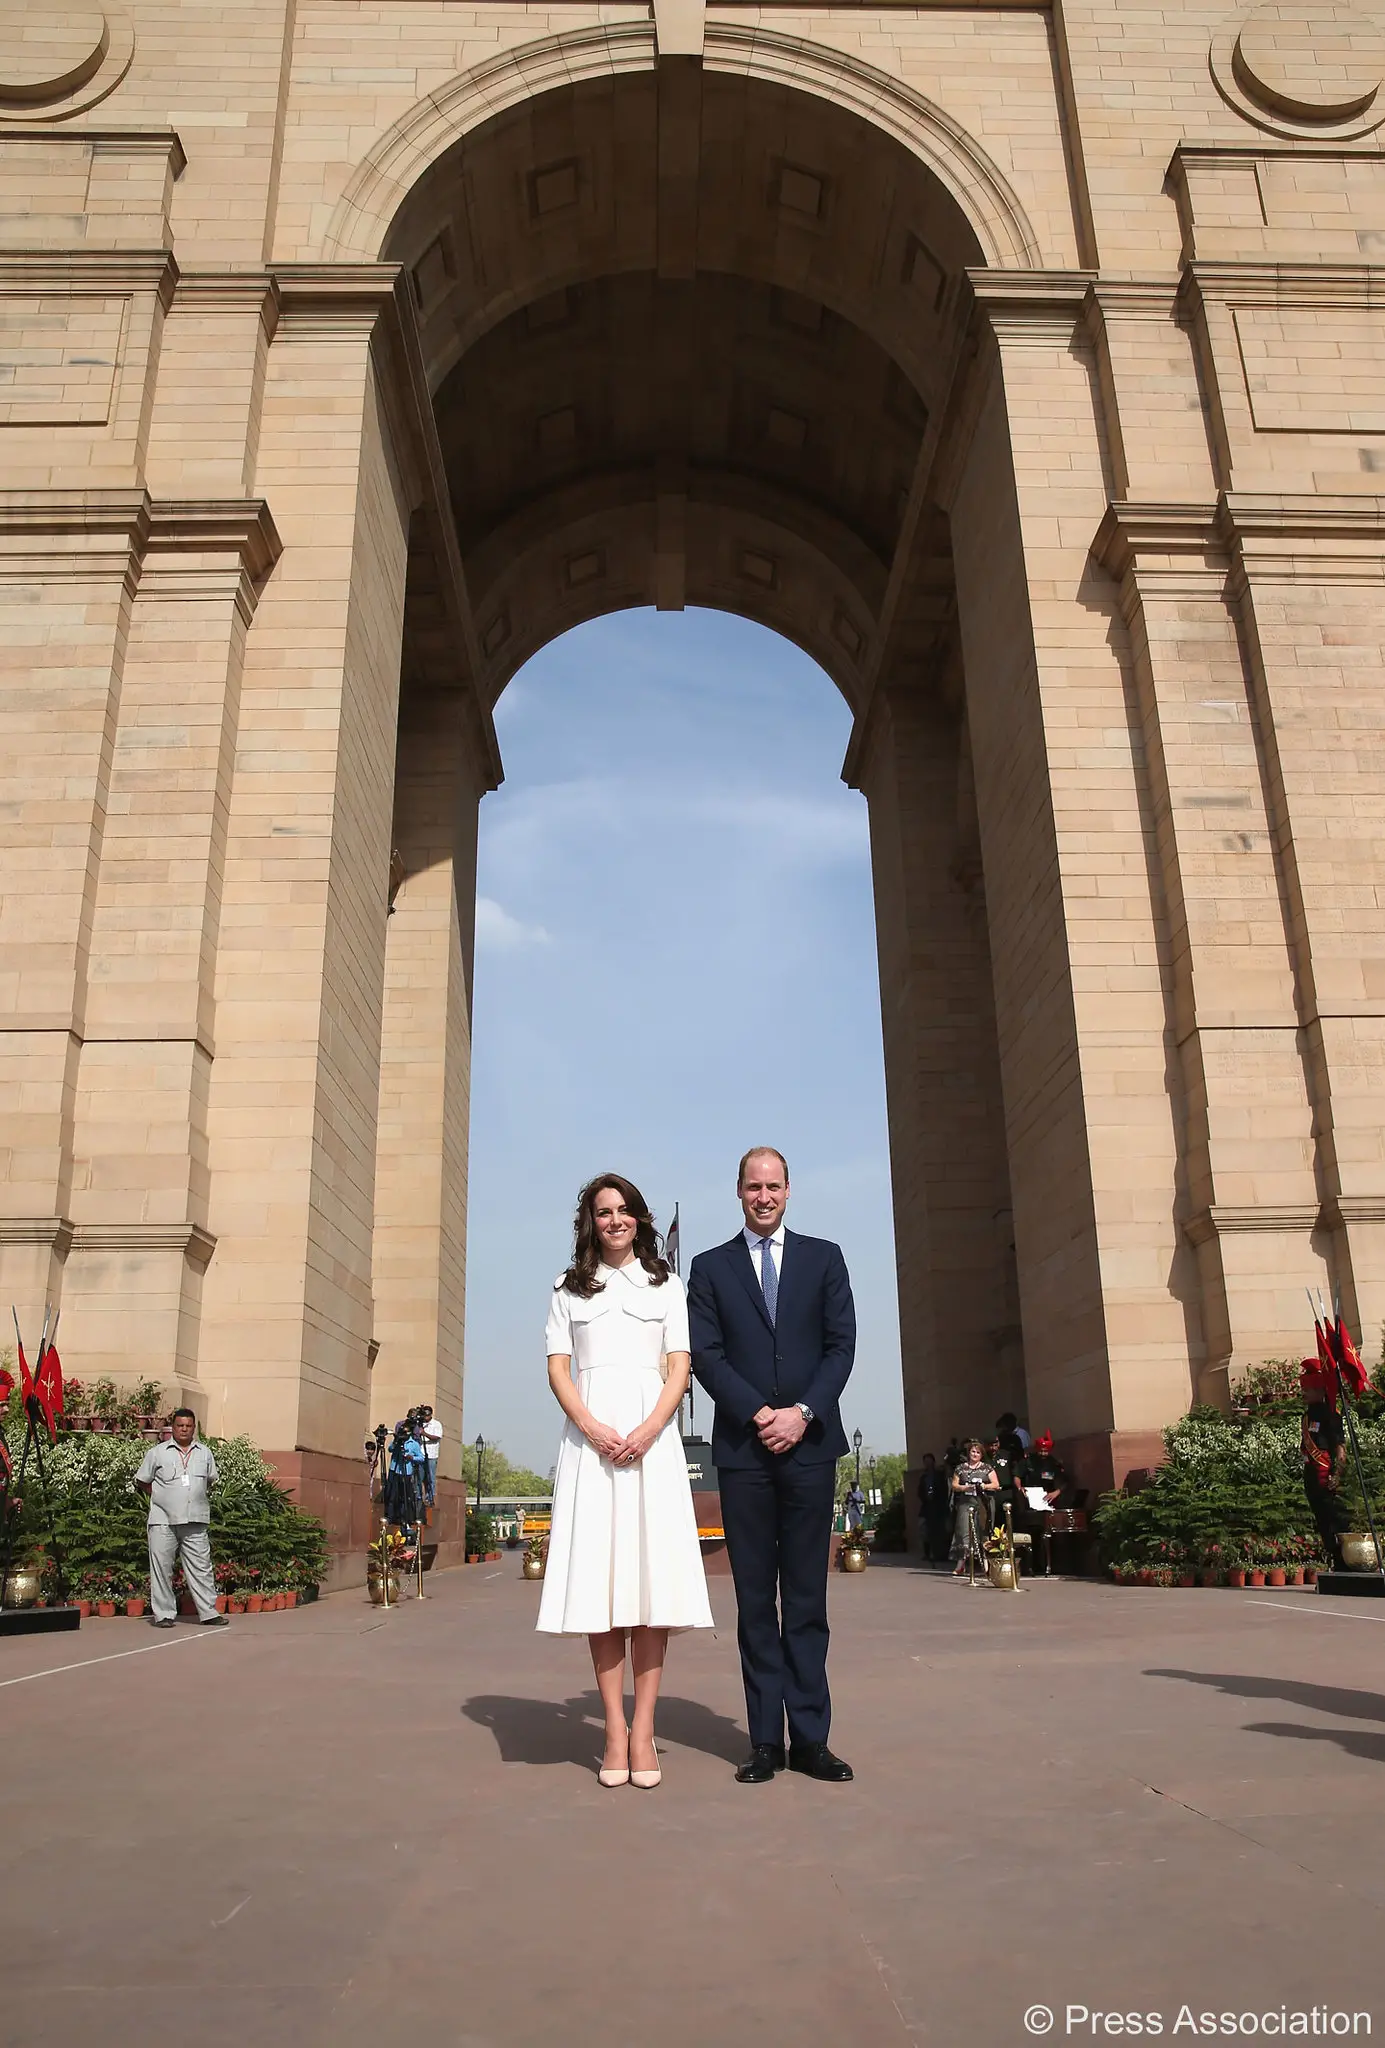 The Duke and Duchess of Cambridge visited India Gate during India vist